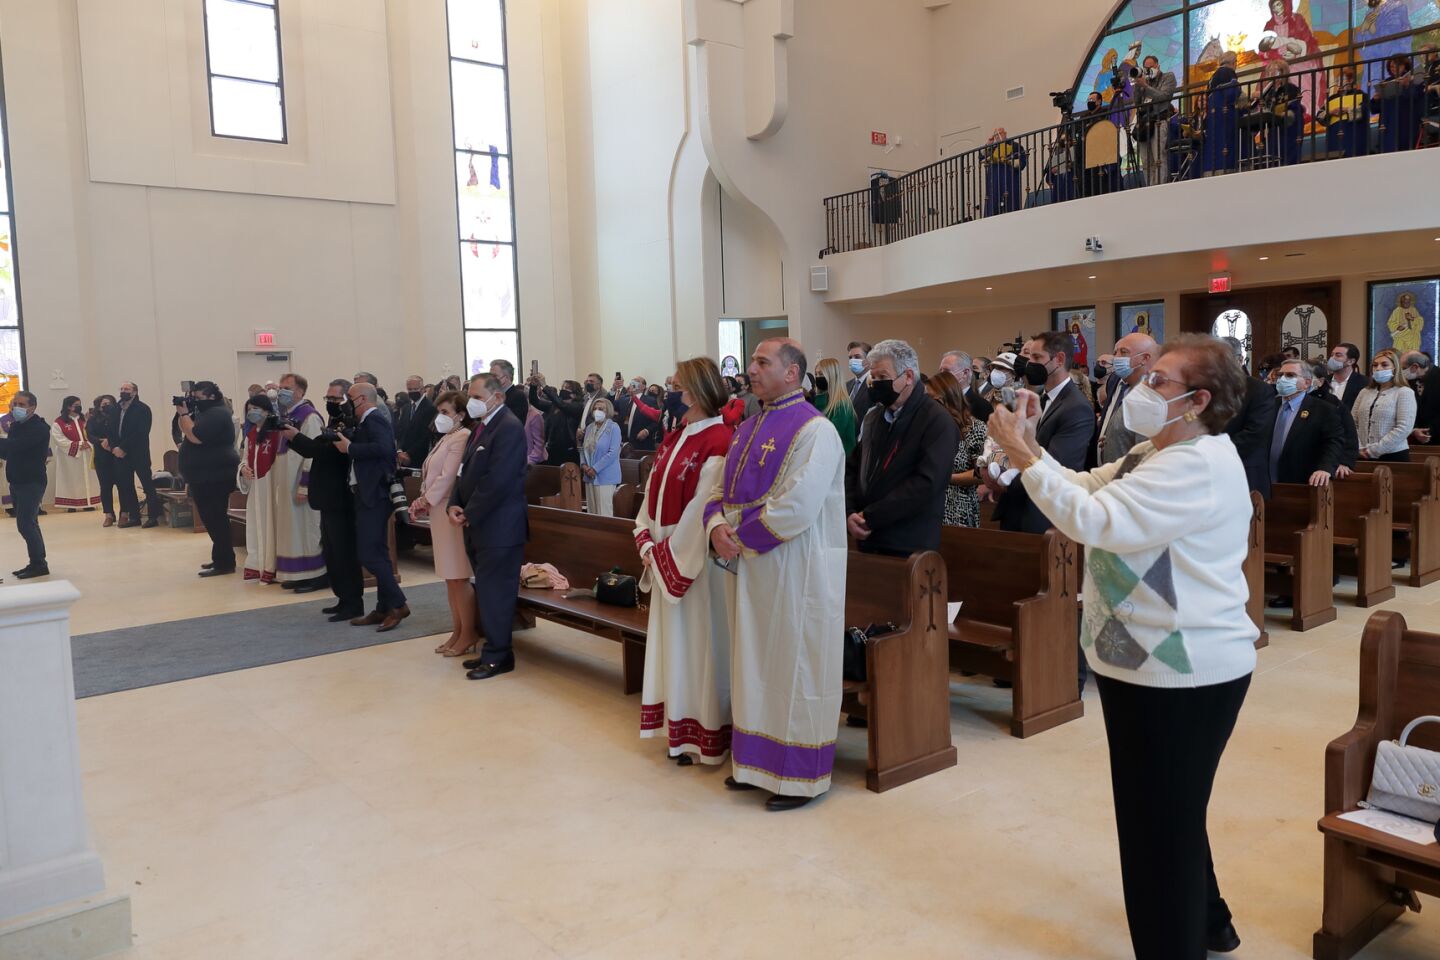 The consecration and church naming ceremony at the new St. John Garabed Armenian Church in San Diego